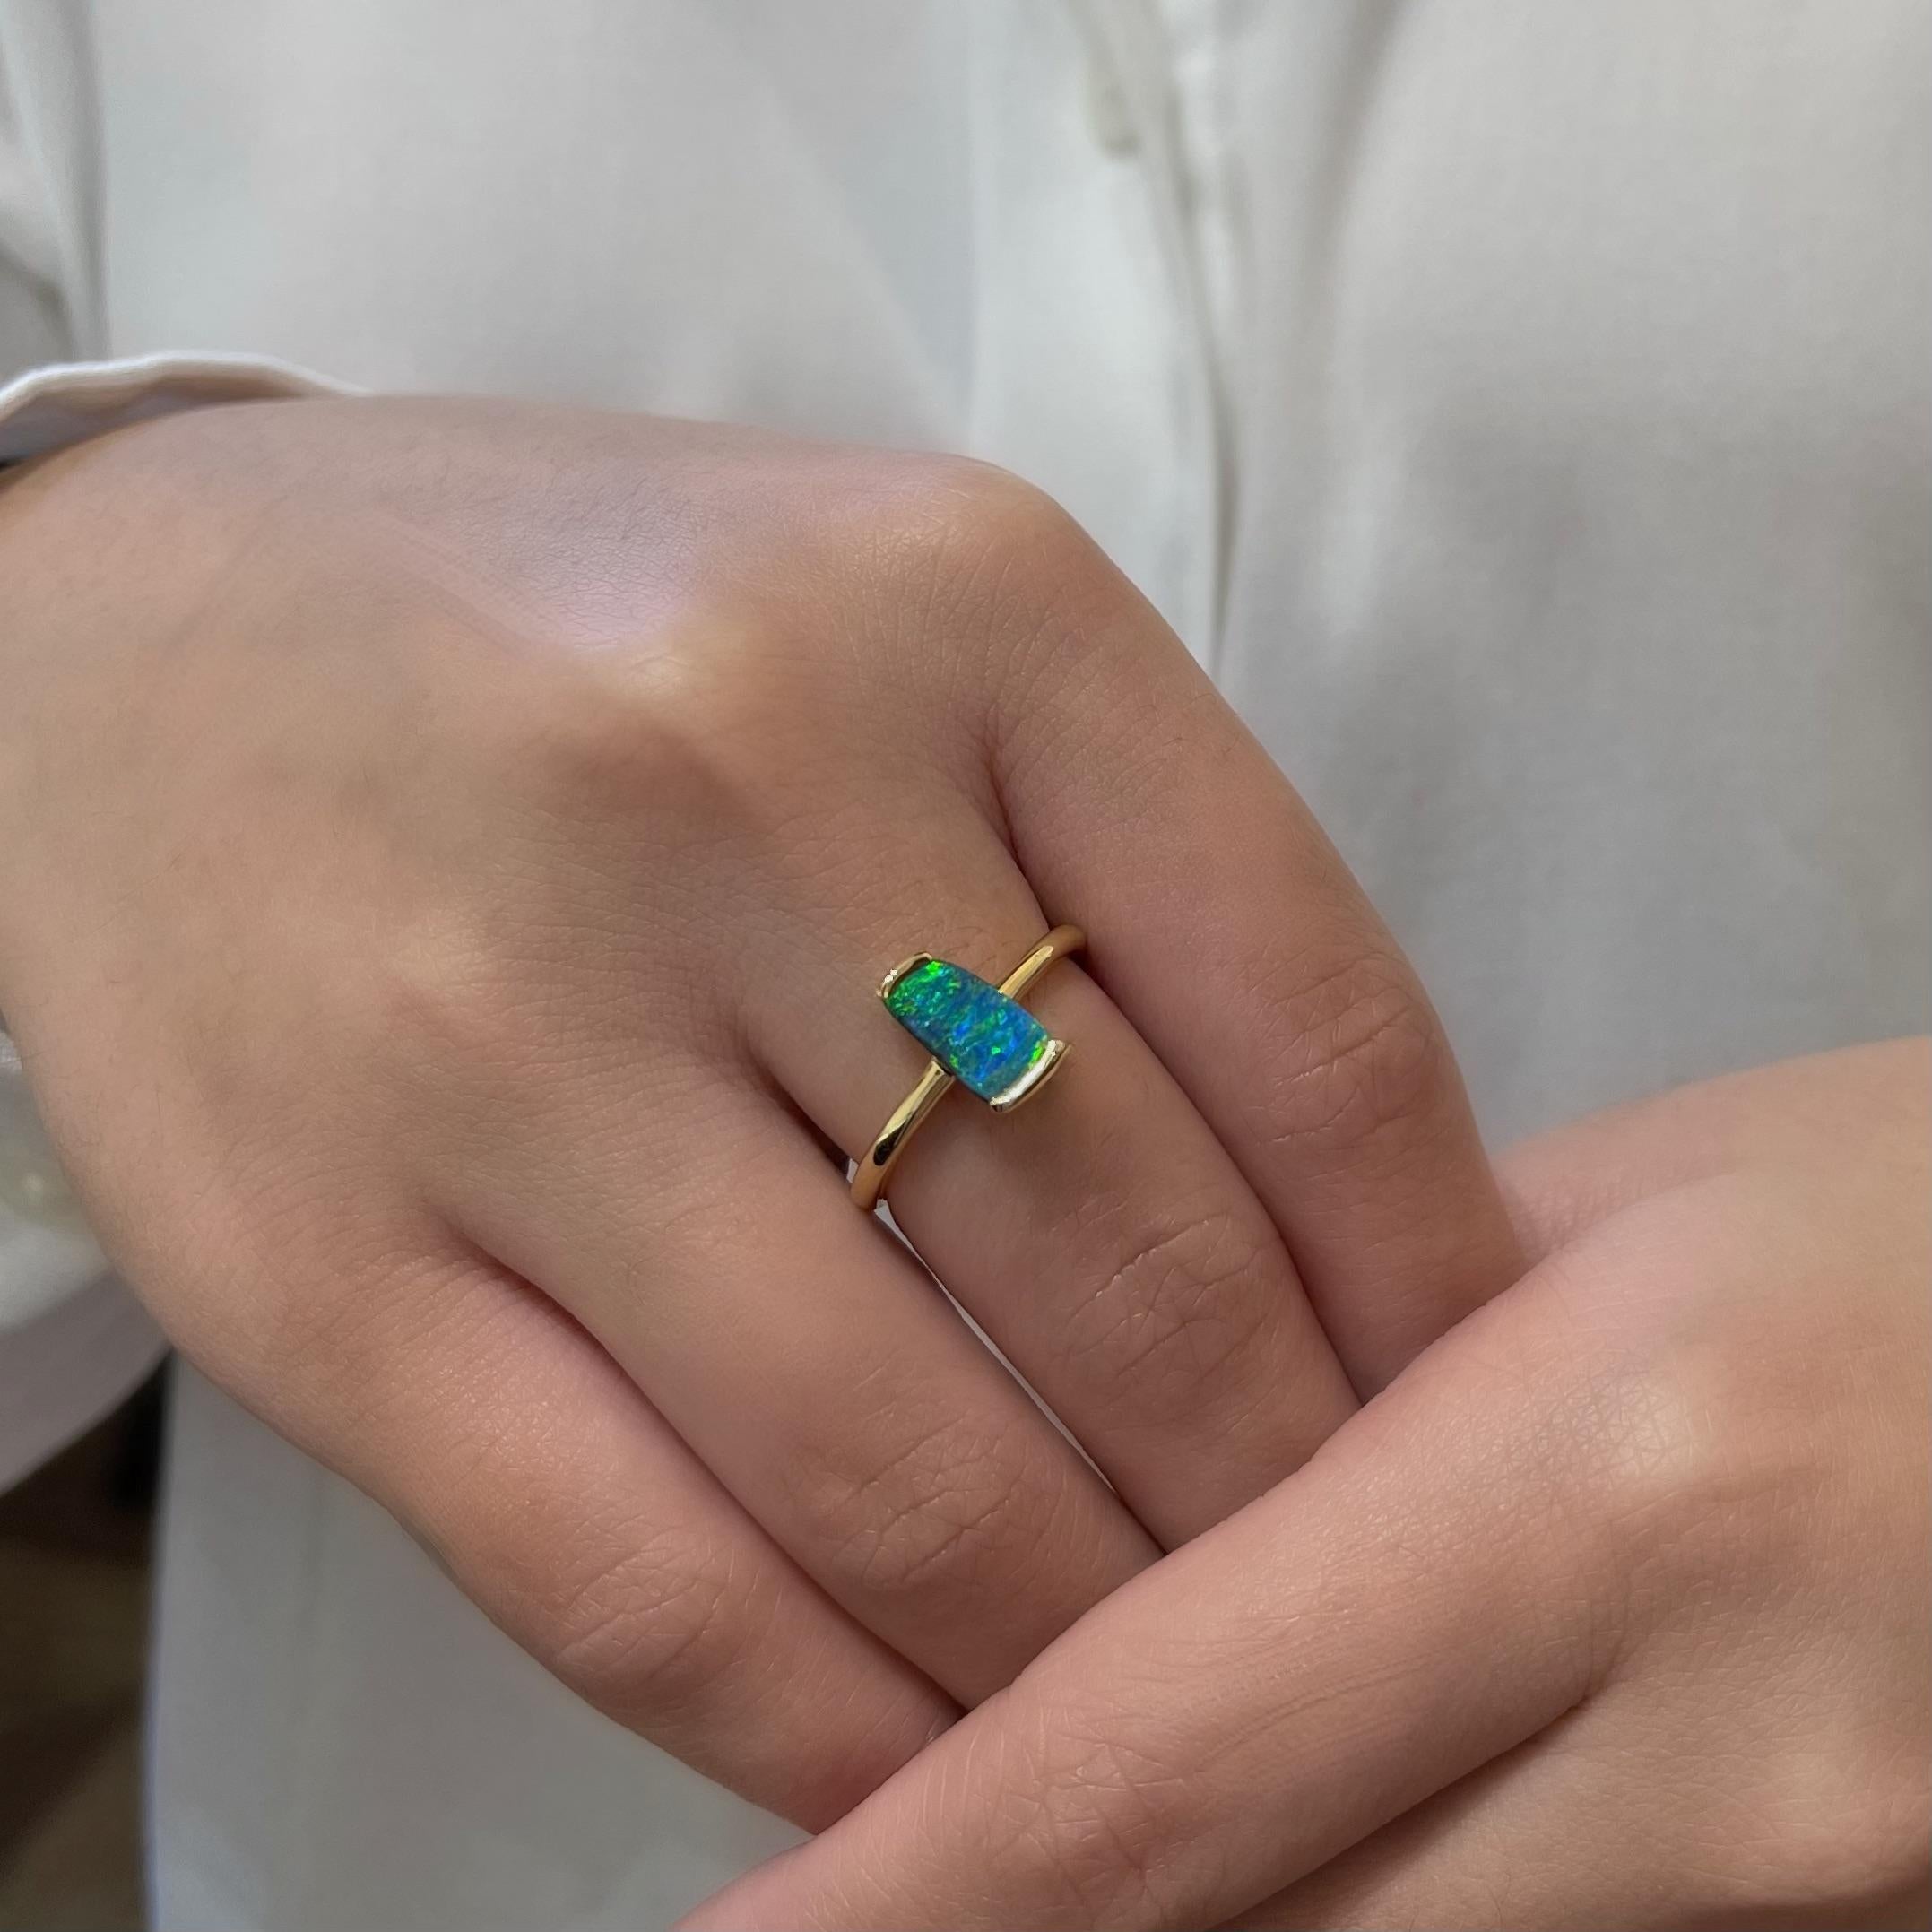 Simple yet elegant, the ‘Crystal Cascade’ opal ring features a boulder opal (1.35ct) ethically sourced from famous Winton mines in Queensland, Australia. The striking blue-green play of colour in this ring adds a beautiful touch to your outfit and